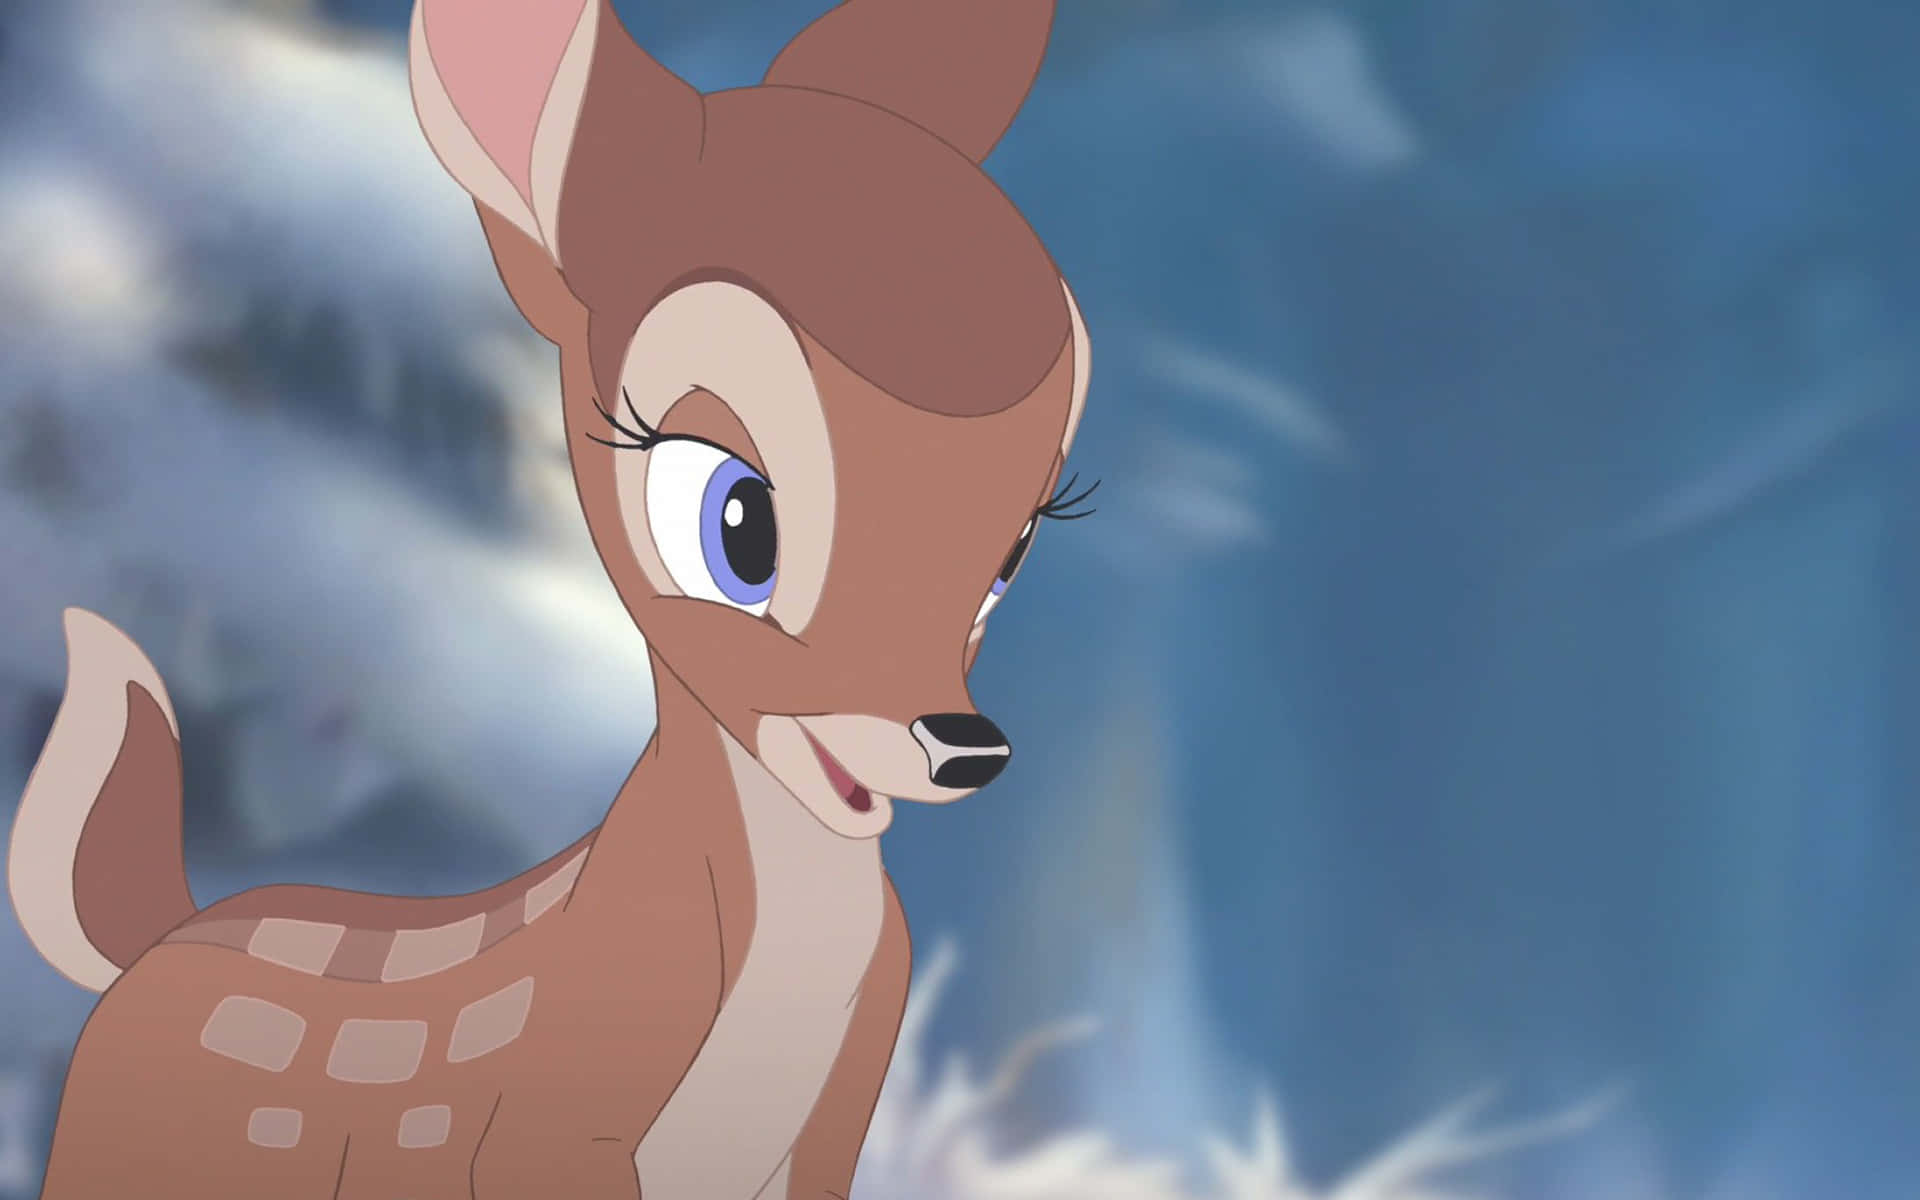 Bambi meets a friendly forest creature.